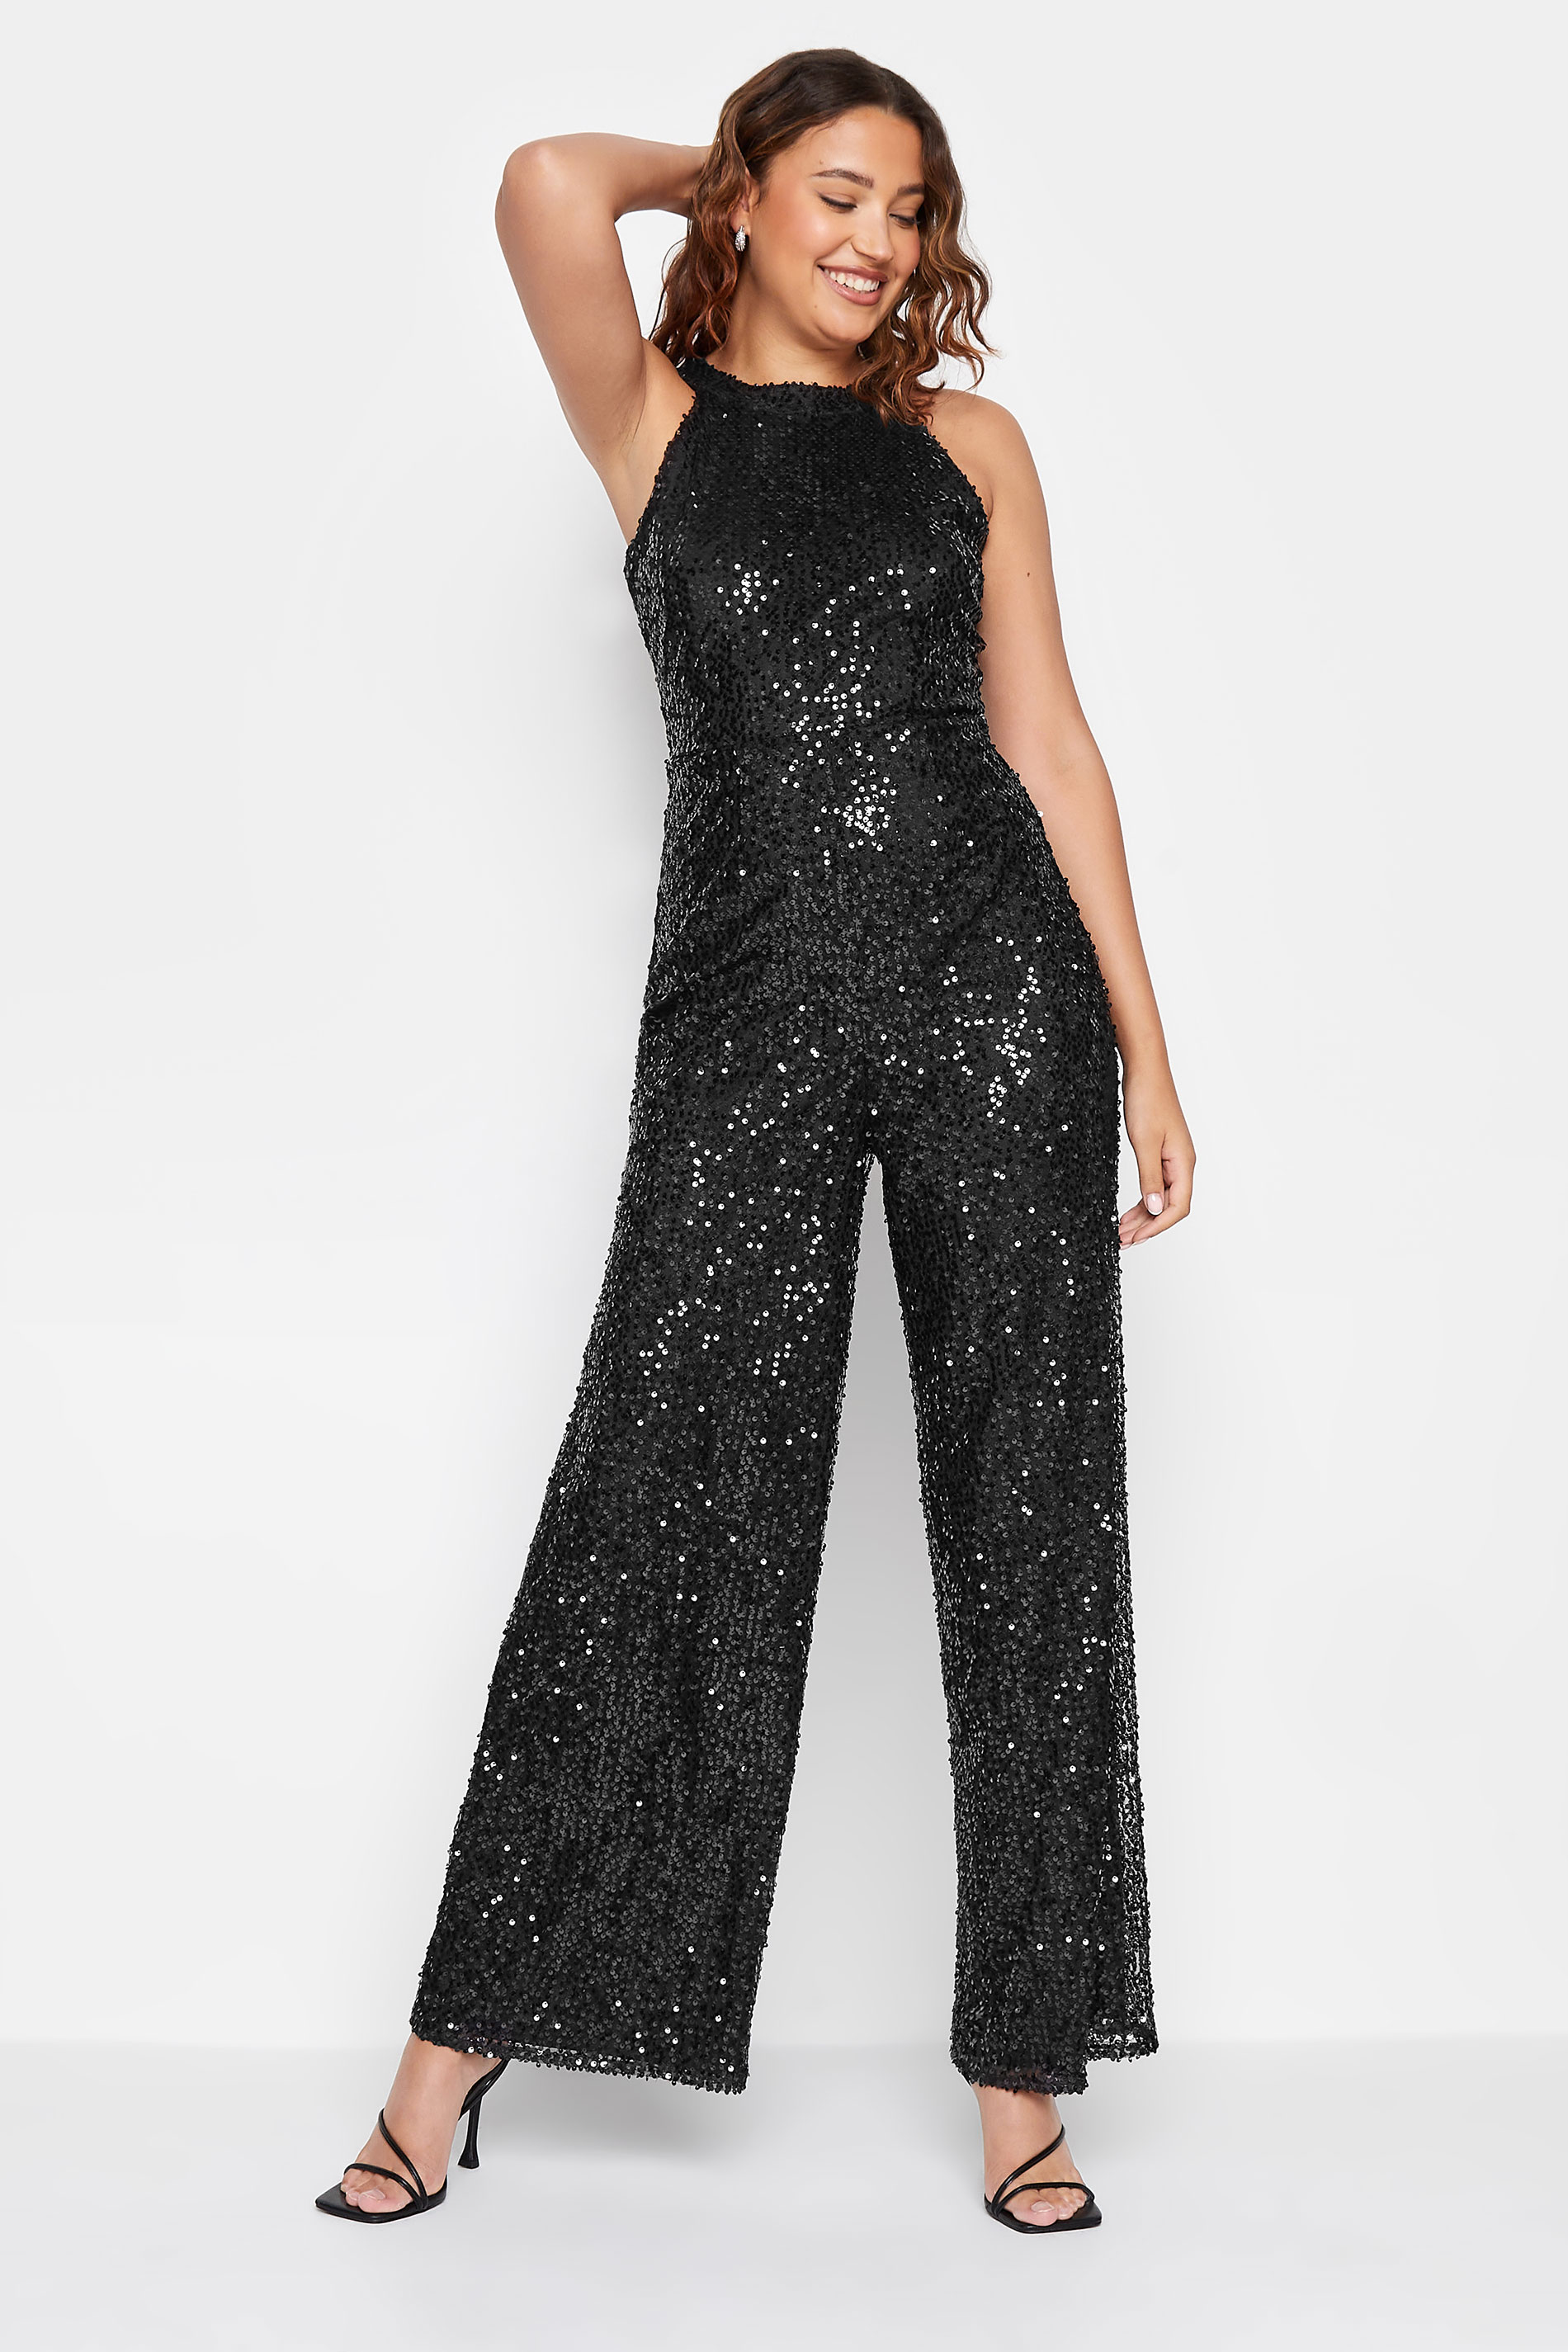 LTS Tall Black Sequin Embellished Halter Neck Jumpsuit | Long Tall Sally 2